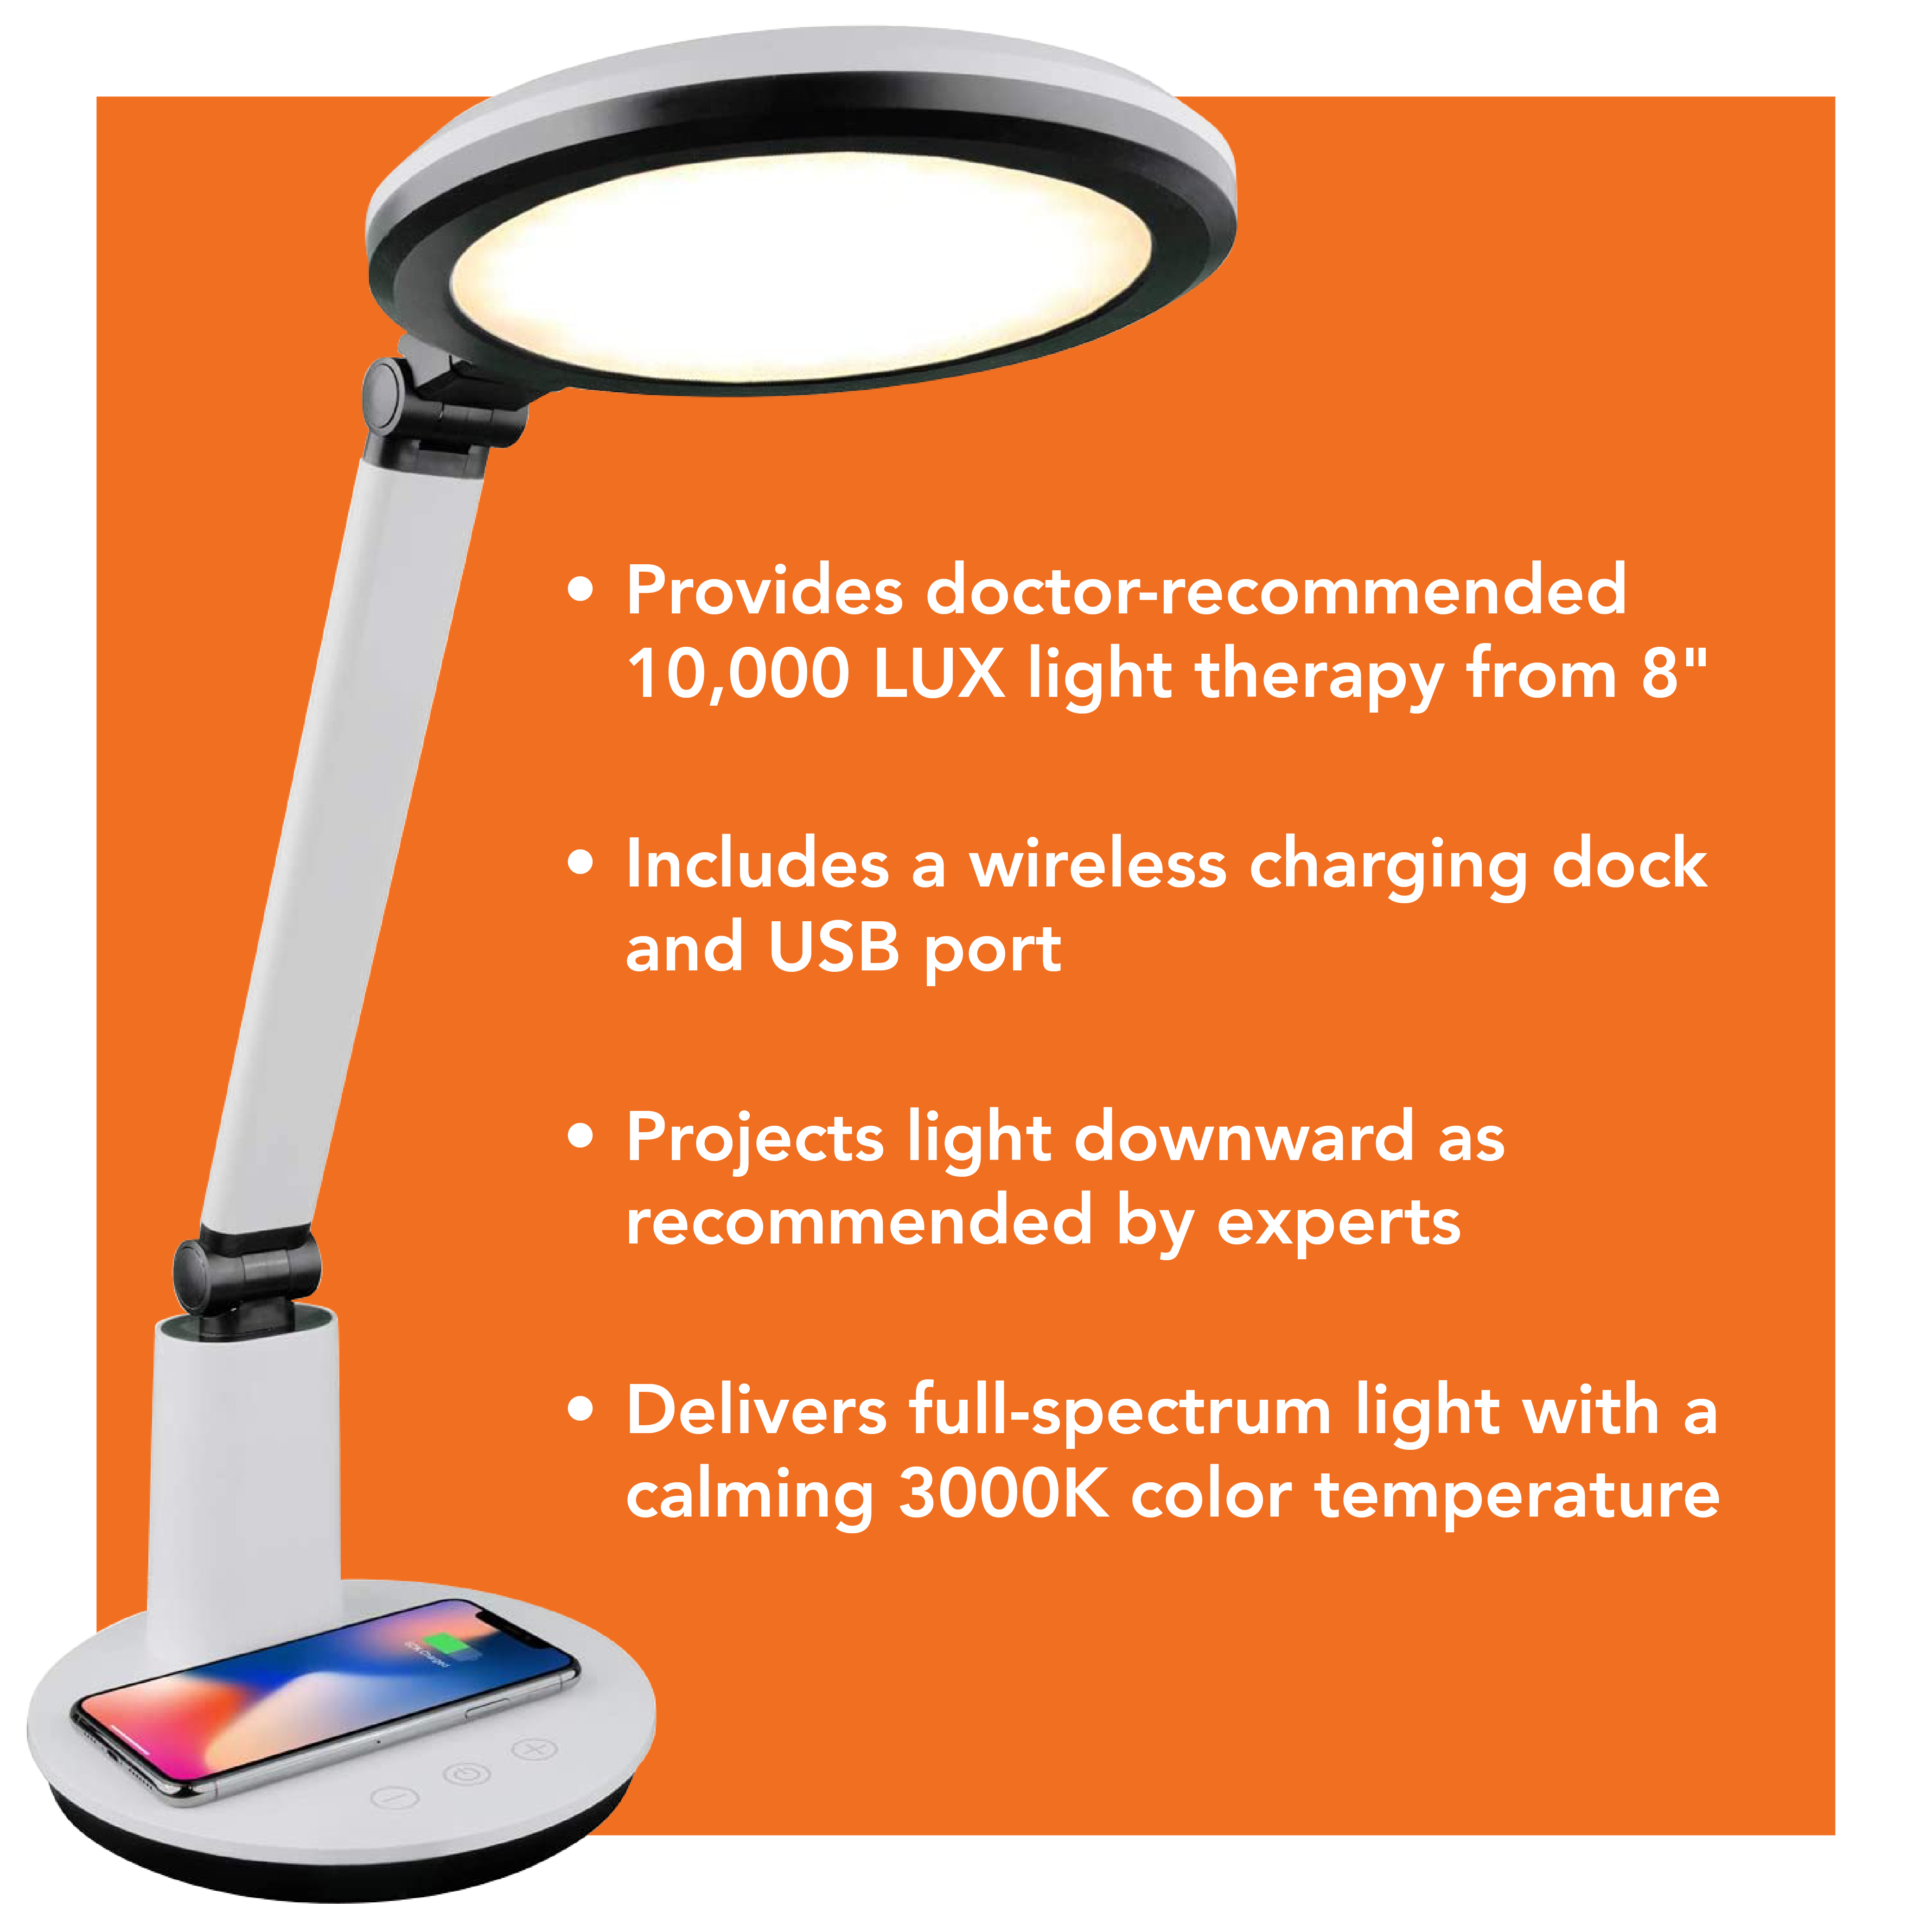 TheraLite Halo Bright Light Therapy Lamp - Carex Health Brands